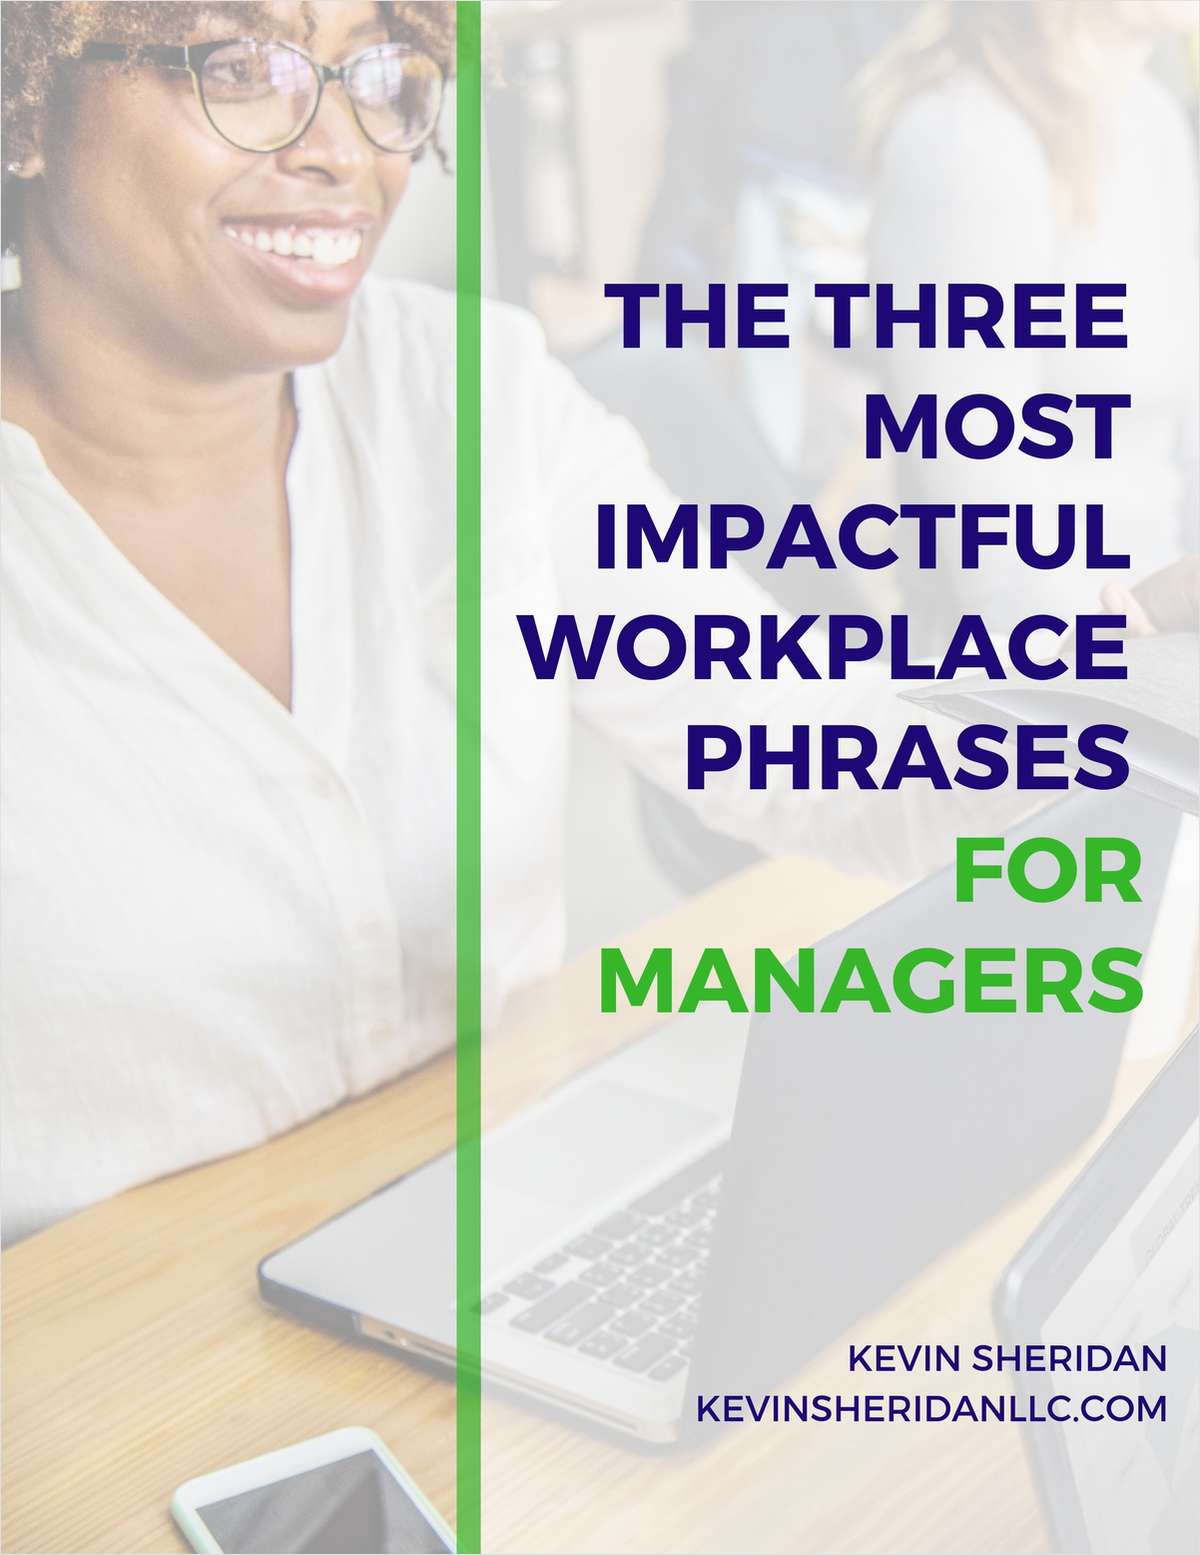 The Three Most Impactful Workplace Phrases for Managers